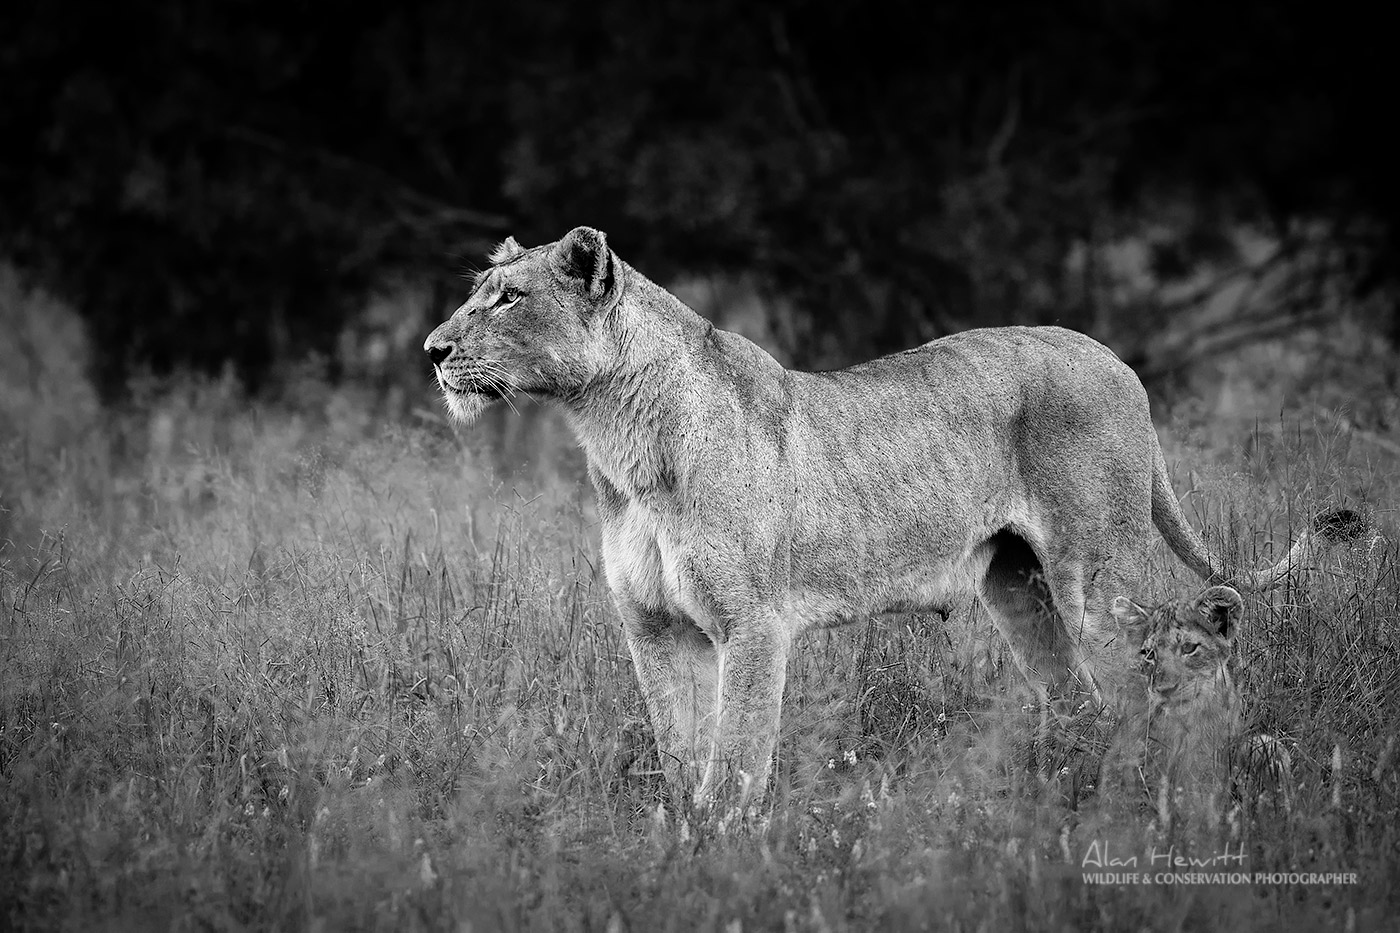 Lioness and cub in black and white